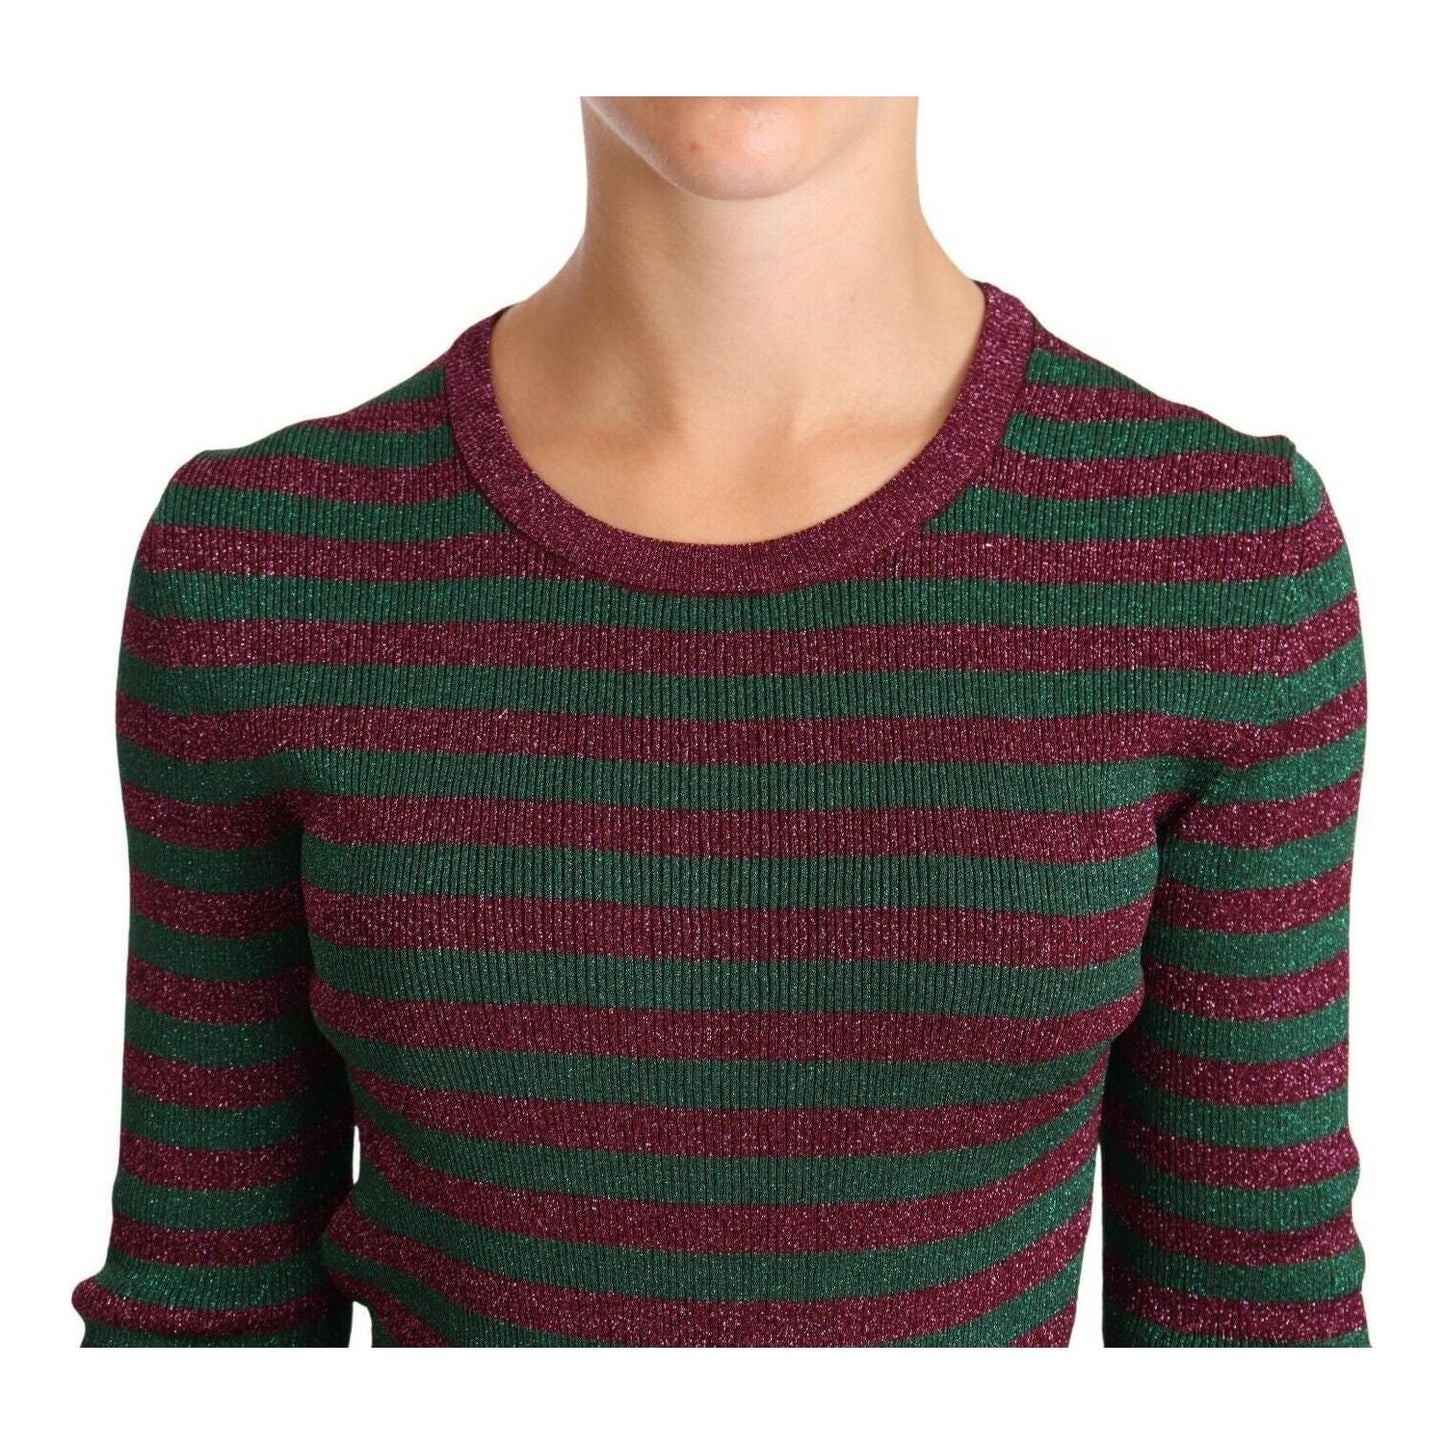 Dolce & Gabbana Elegant Maroon and Green Striped Crewneck Sweater WOMAN SWEATERS multicolor-striped-crew-neck-pullover-sweater